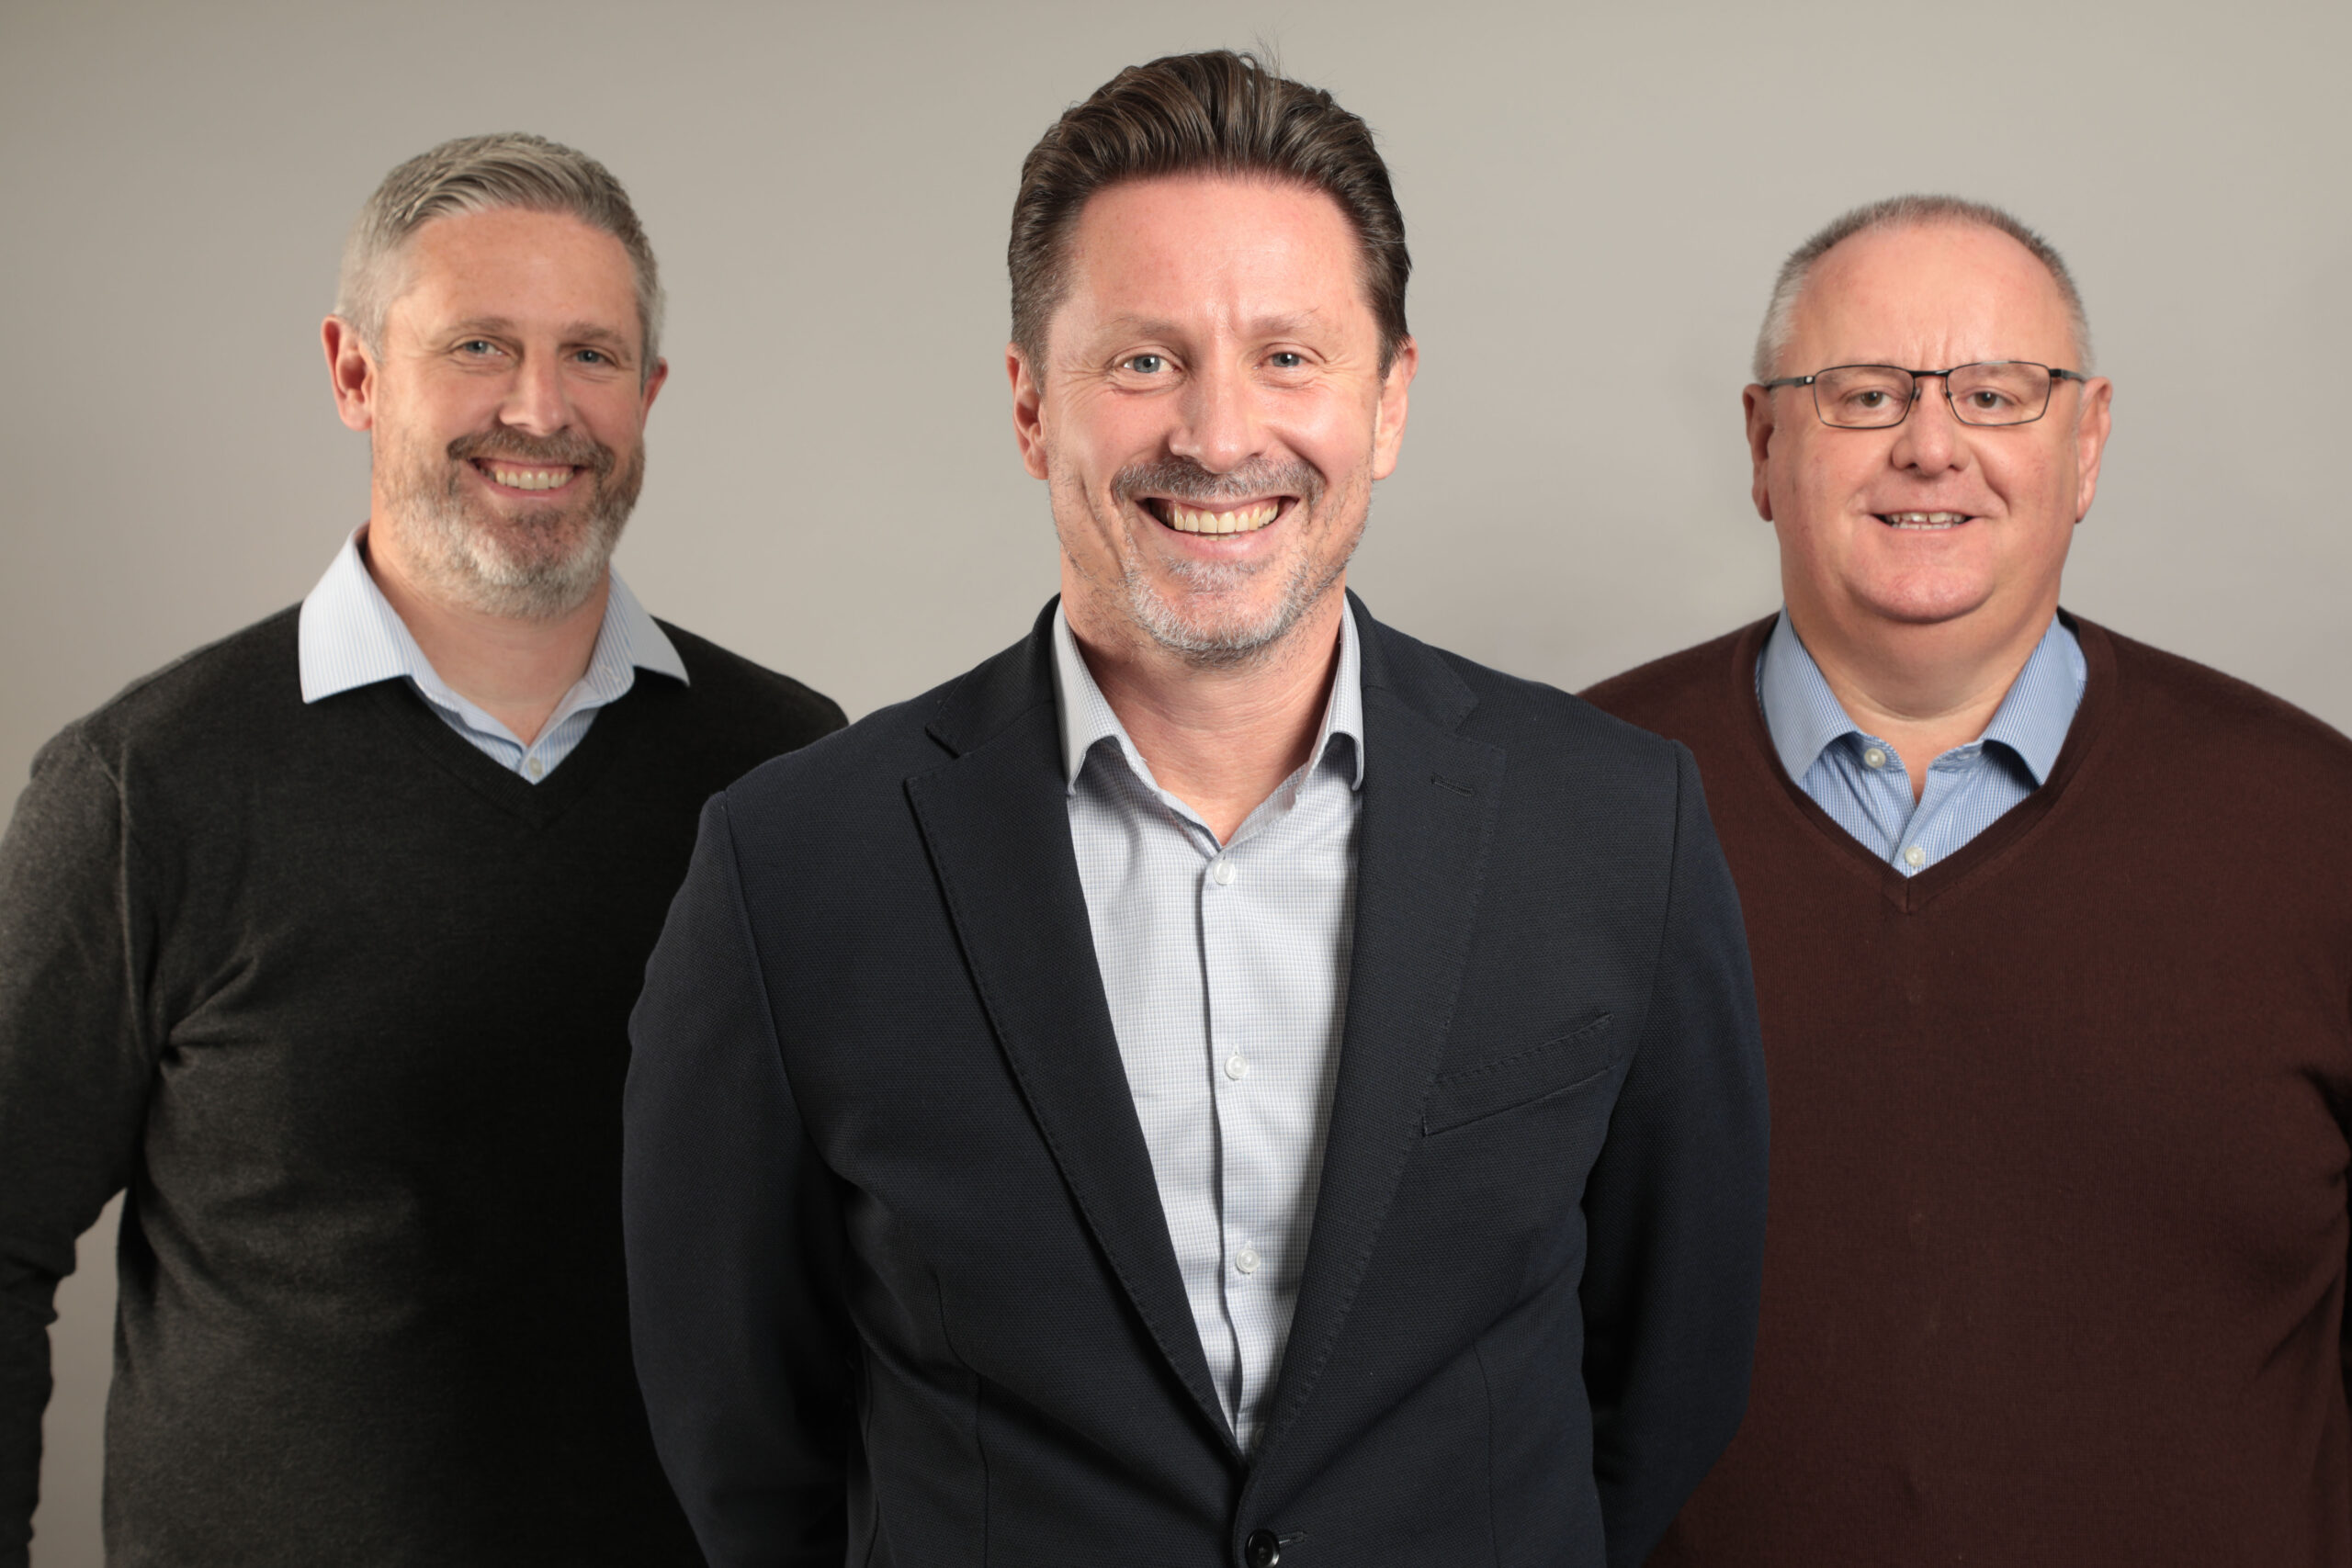 From left to right:<br />
Jim Sheehan (Commercial Director)<br />
Scott Shearing (Managing Director)<br />
Steve Harvey (Operations Director)